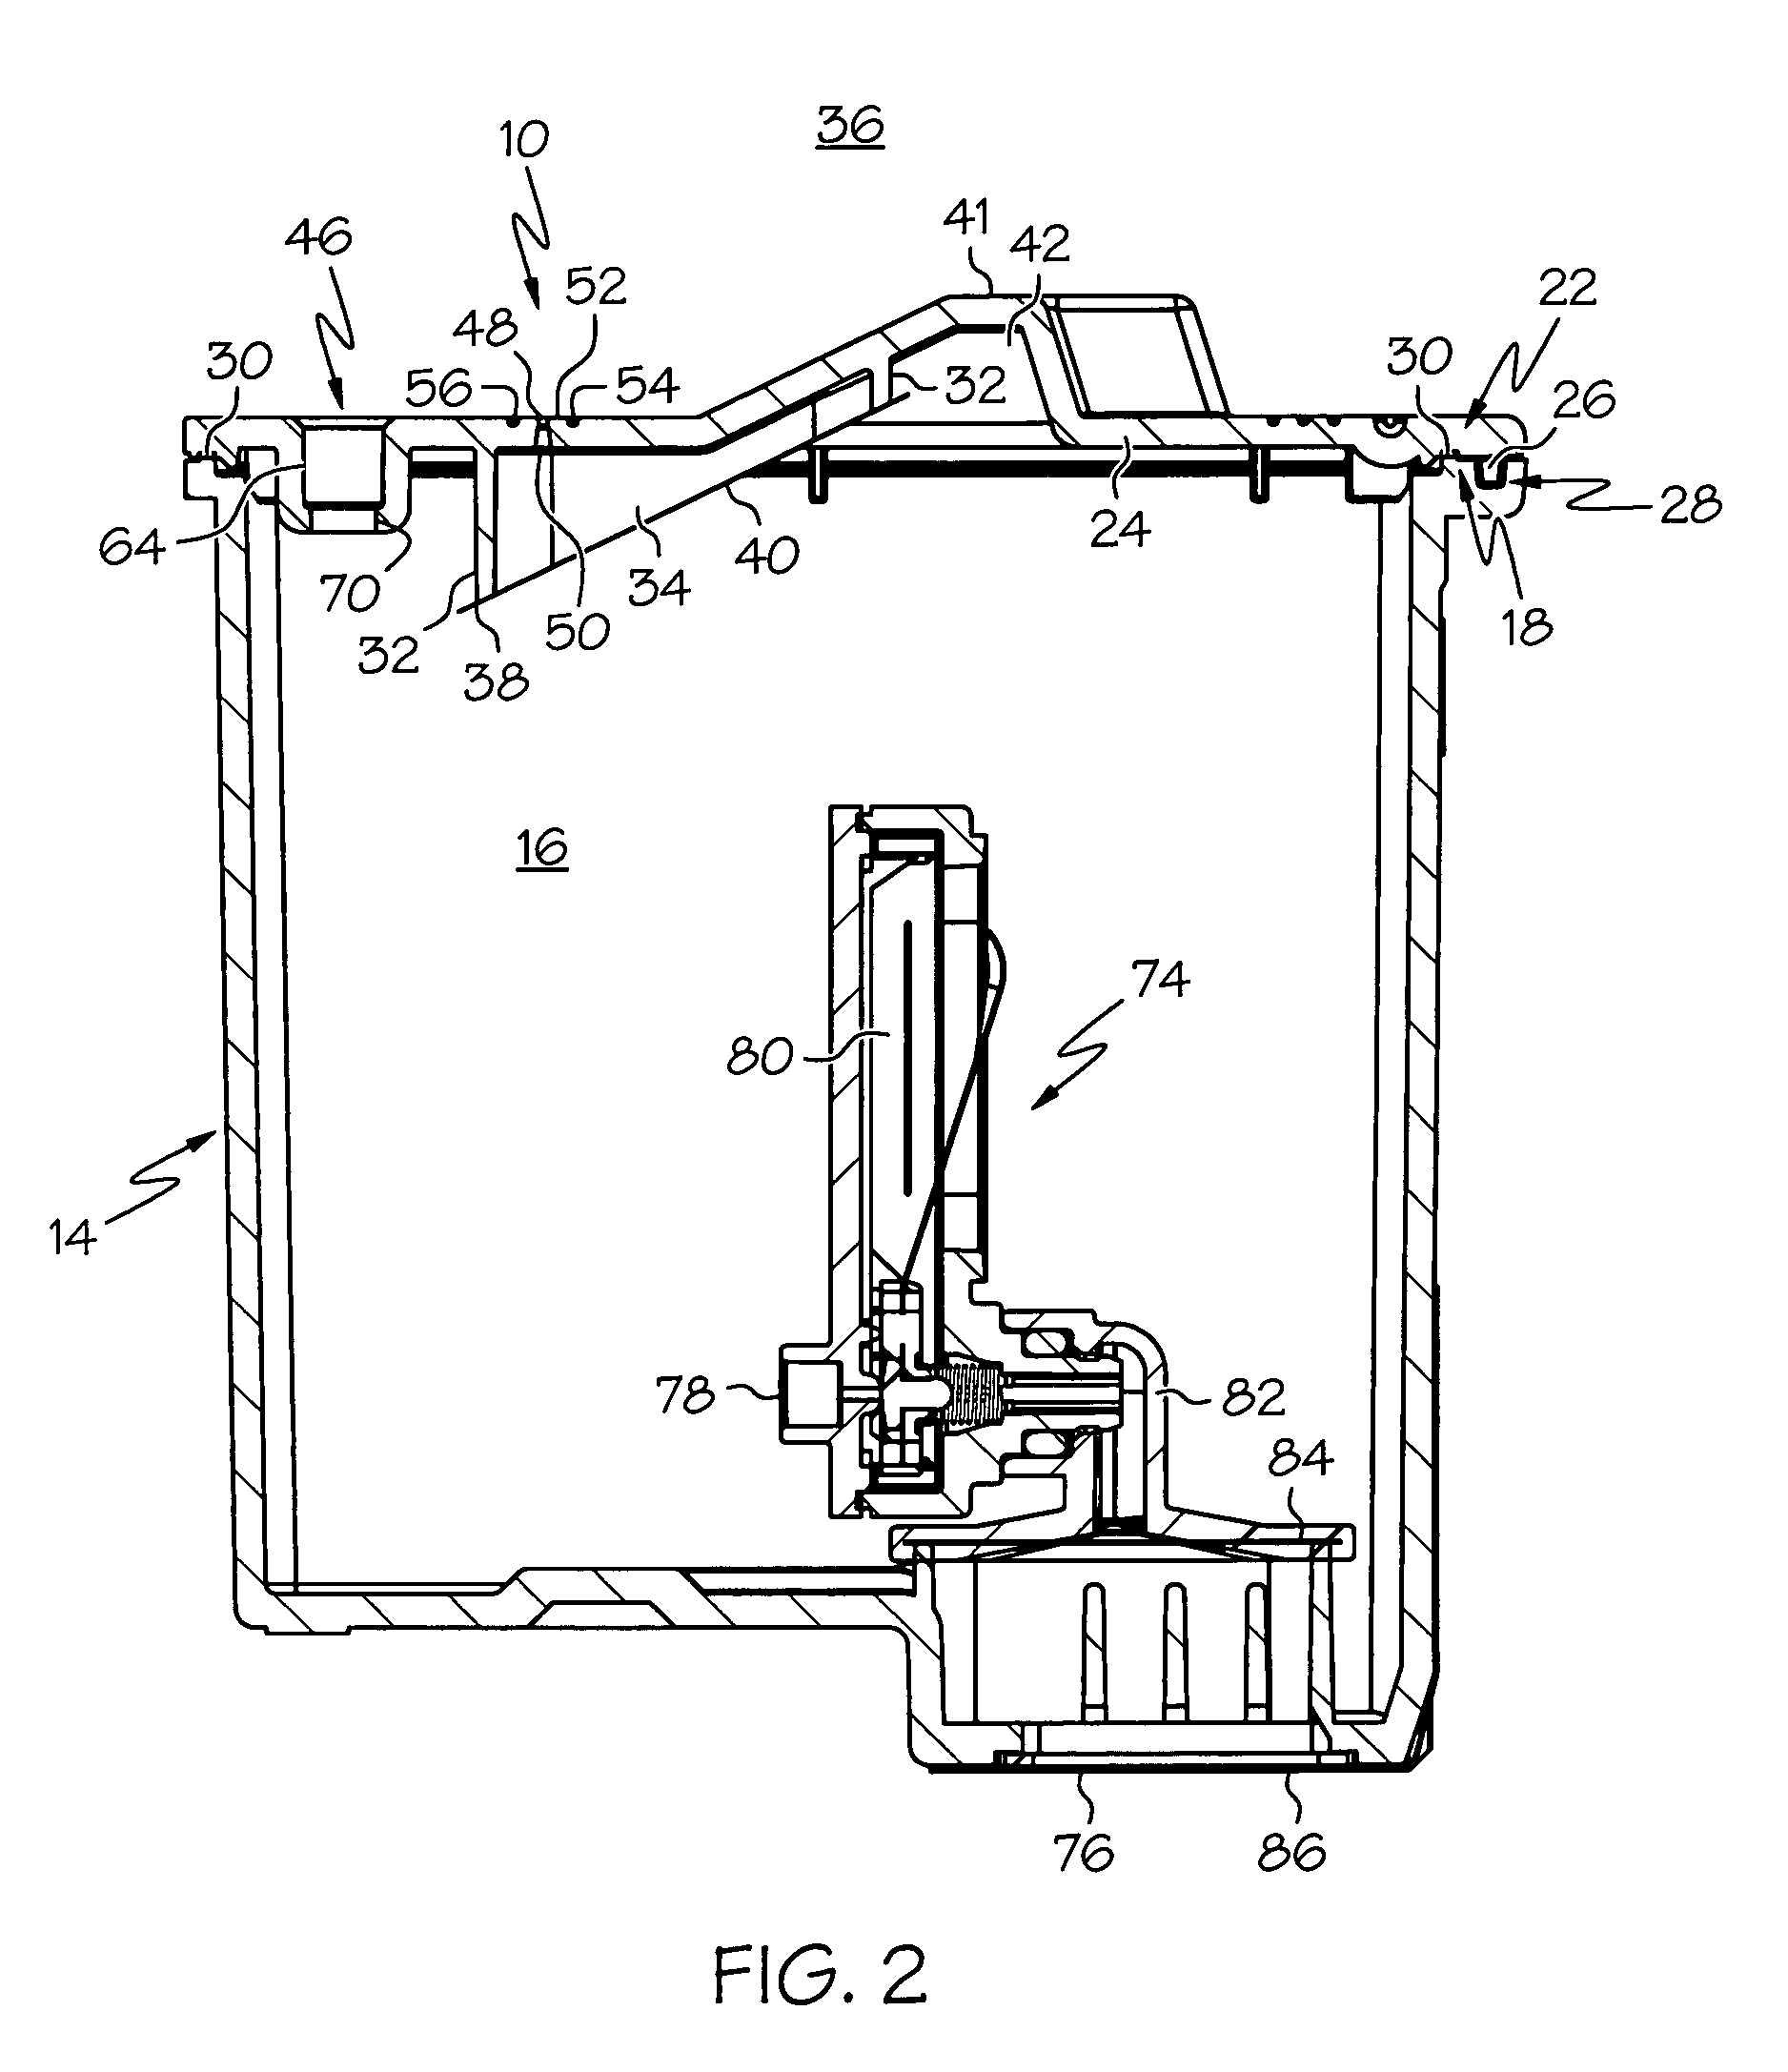 Semipermeable membrane for an ink reservoir and method of attaching the same